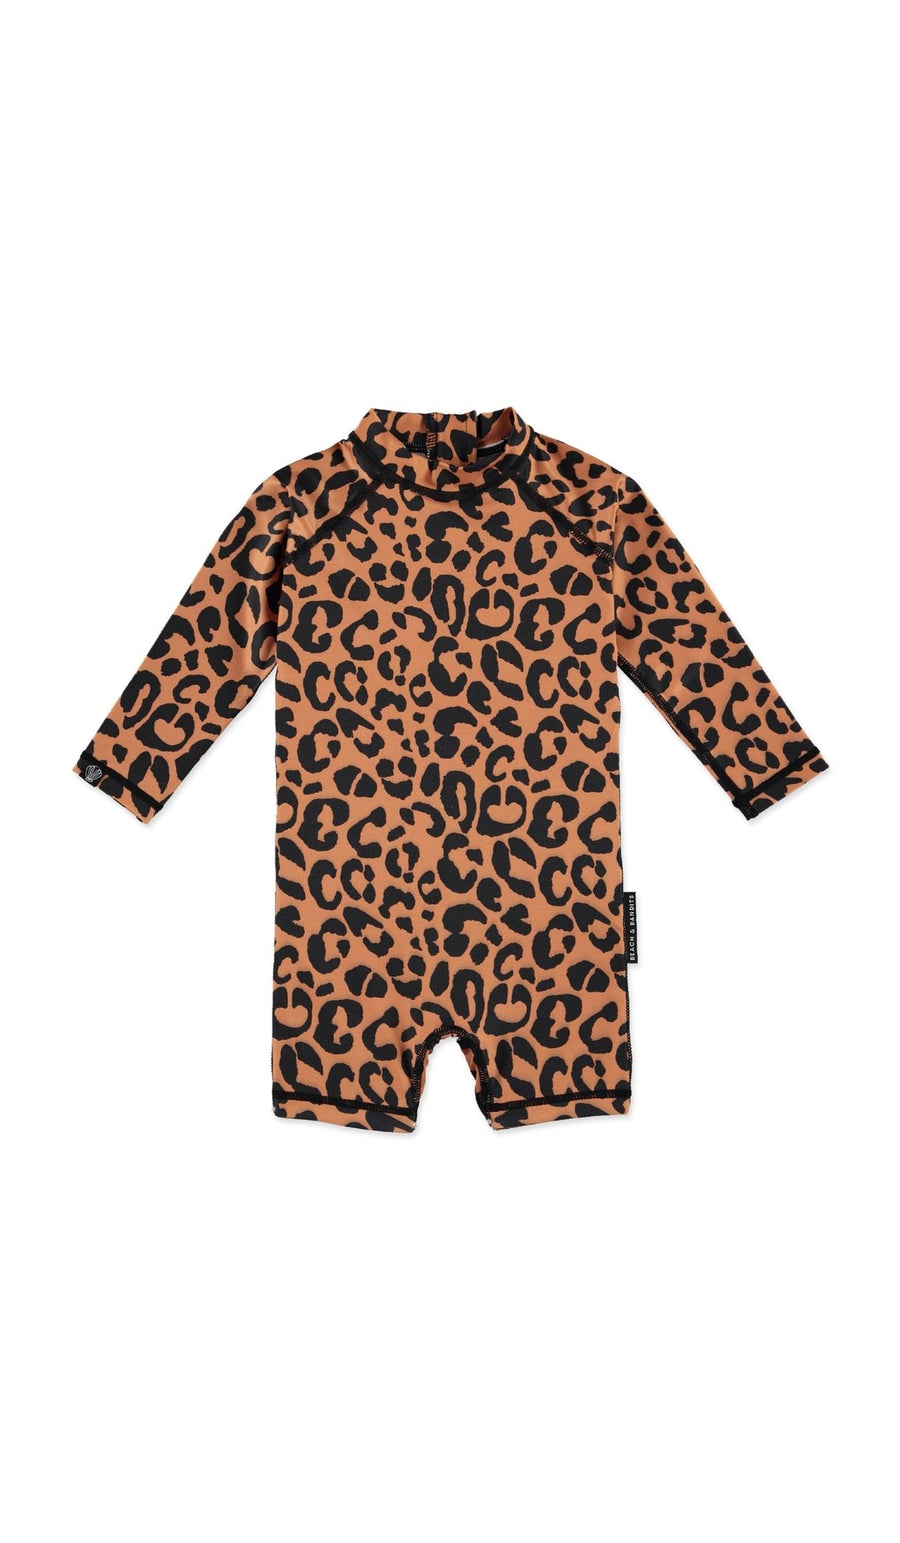 COCO LEOPARD Baby